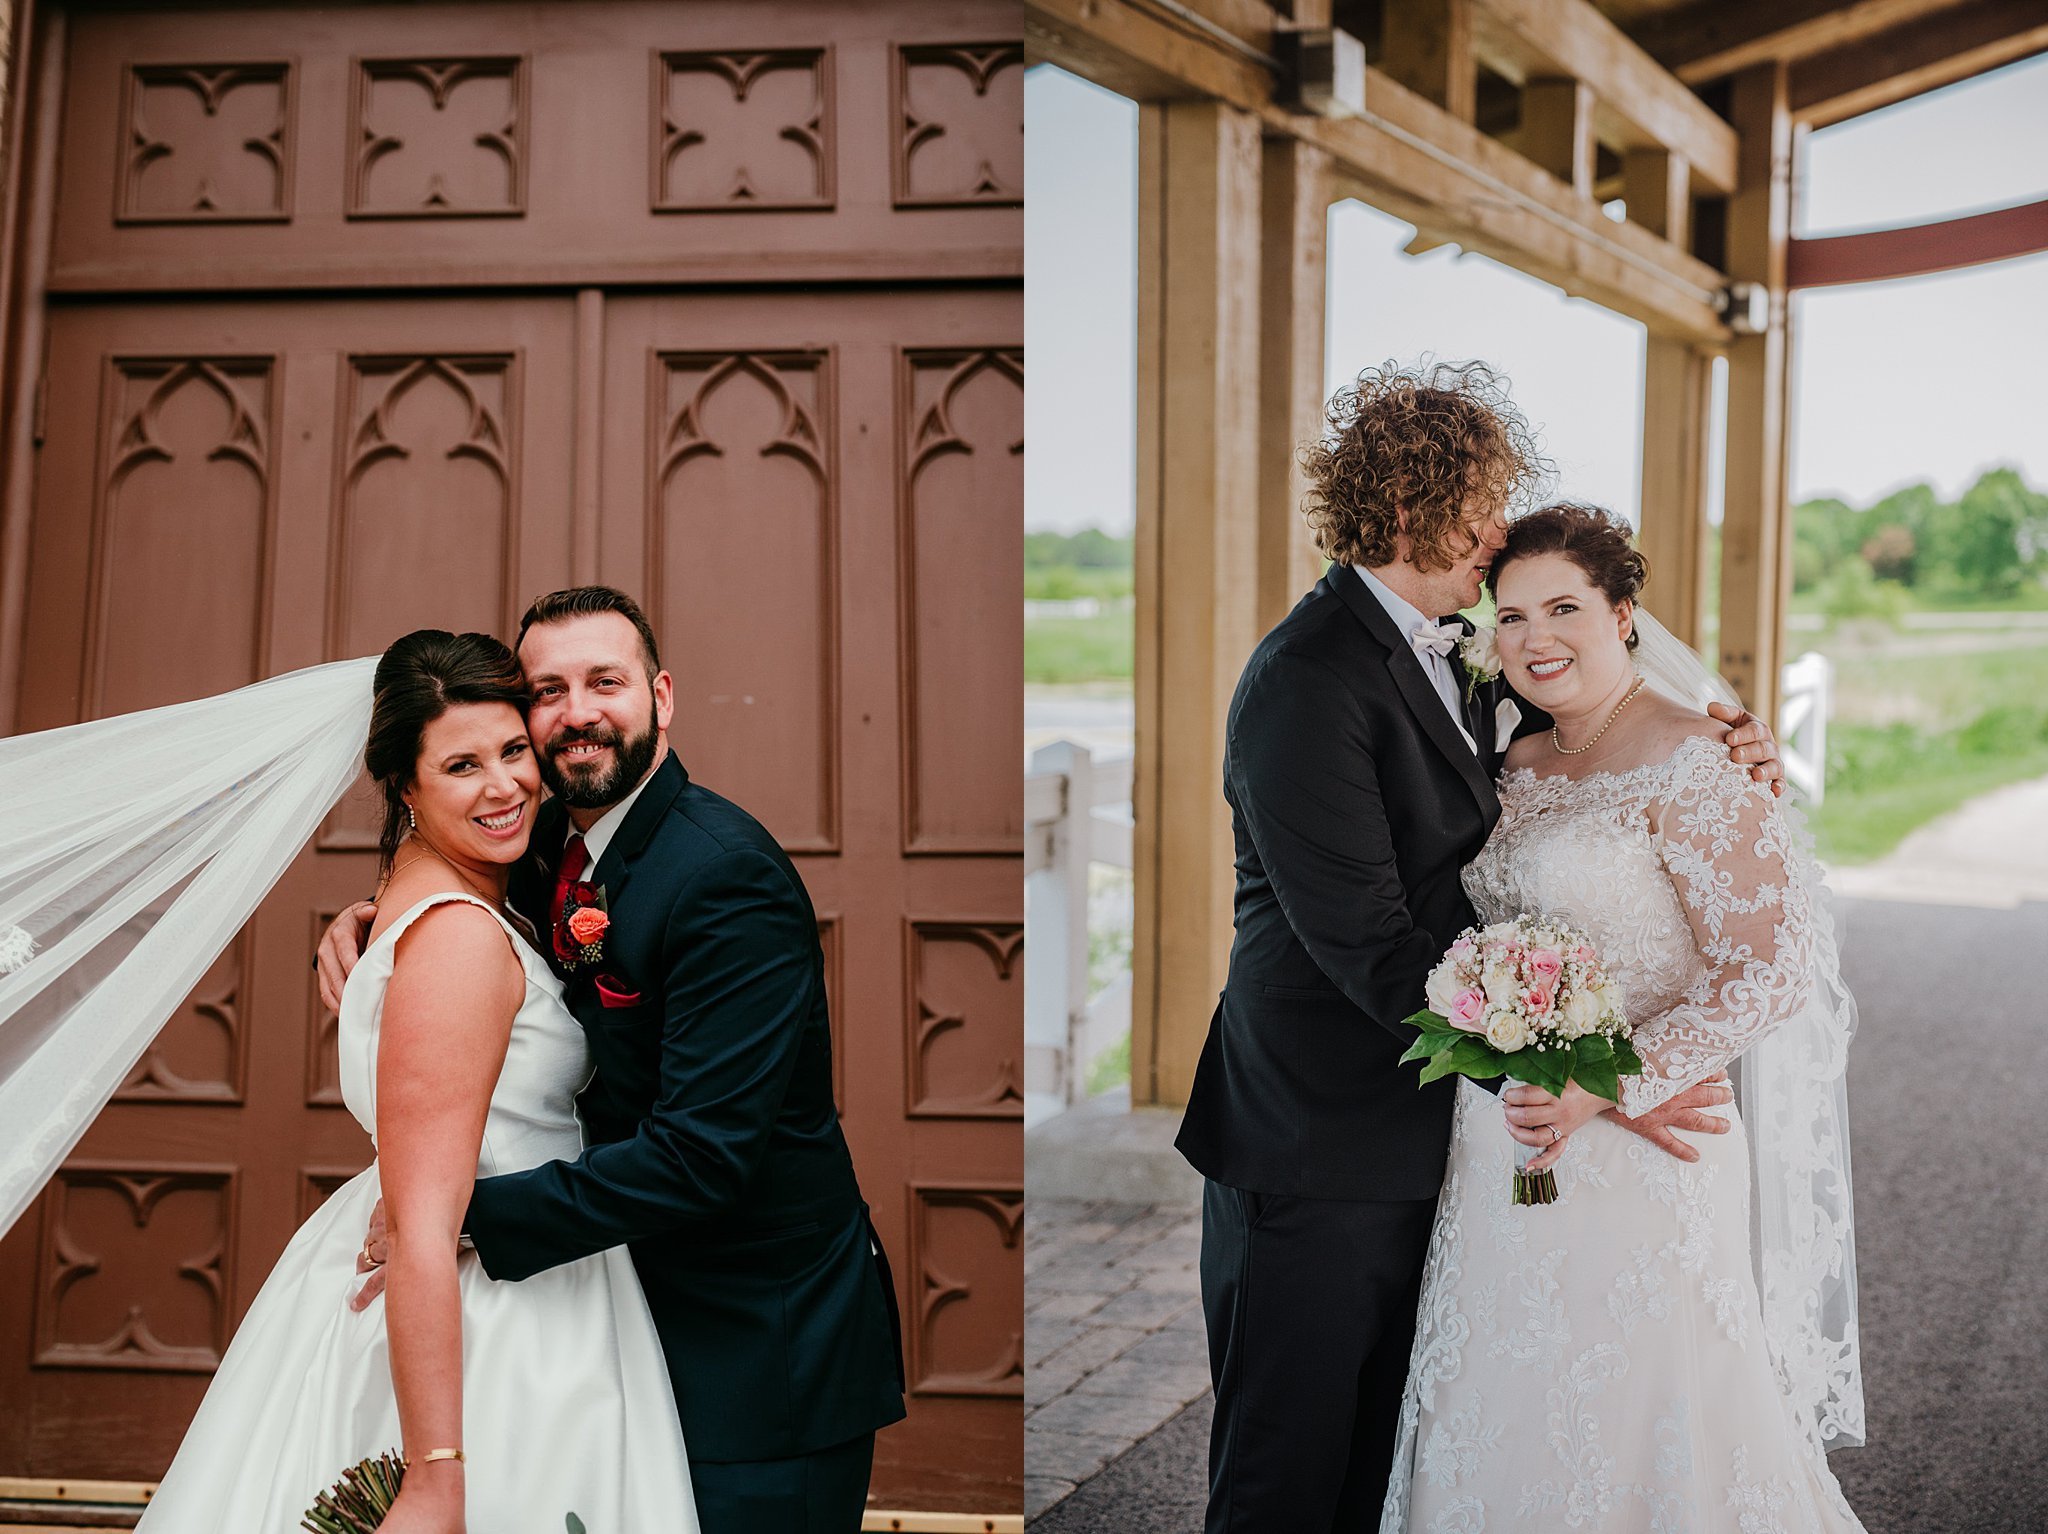 Coworkers hire same wedding photographer